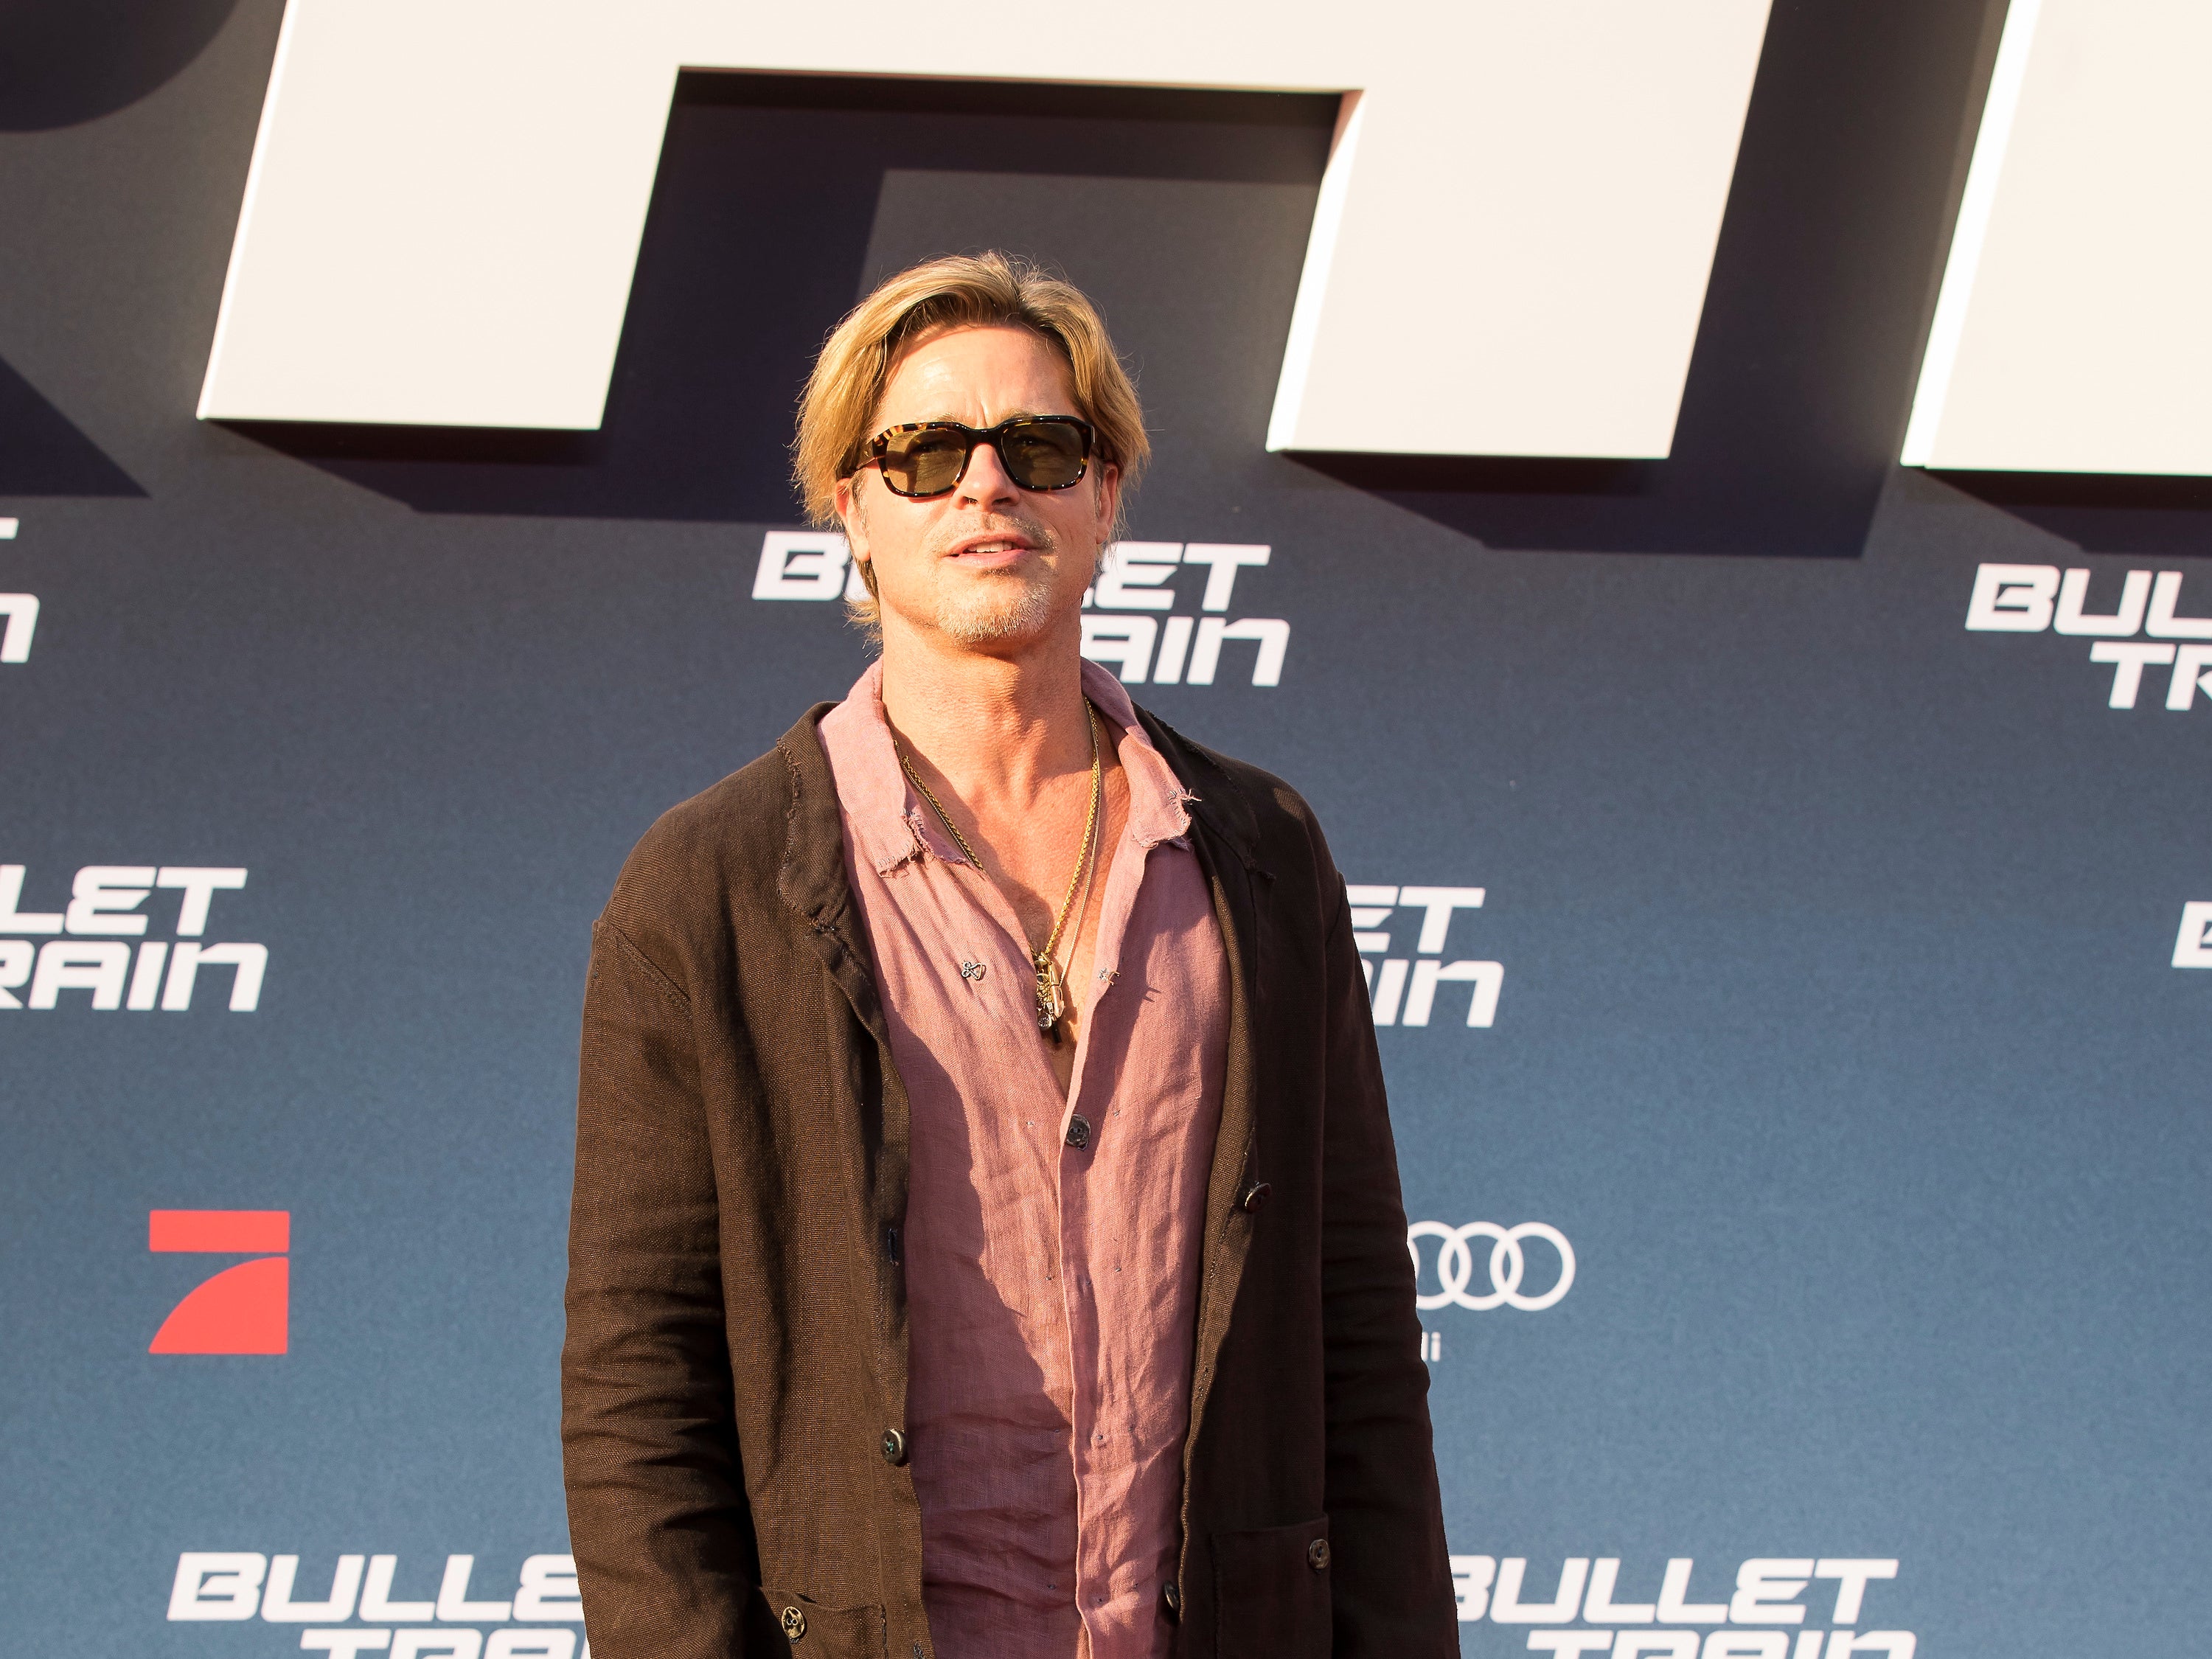 <p>Pitt’s forthcoming film ‘Bullet Train’ is scheduled for theatrical release in the UK on 3 August </p>